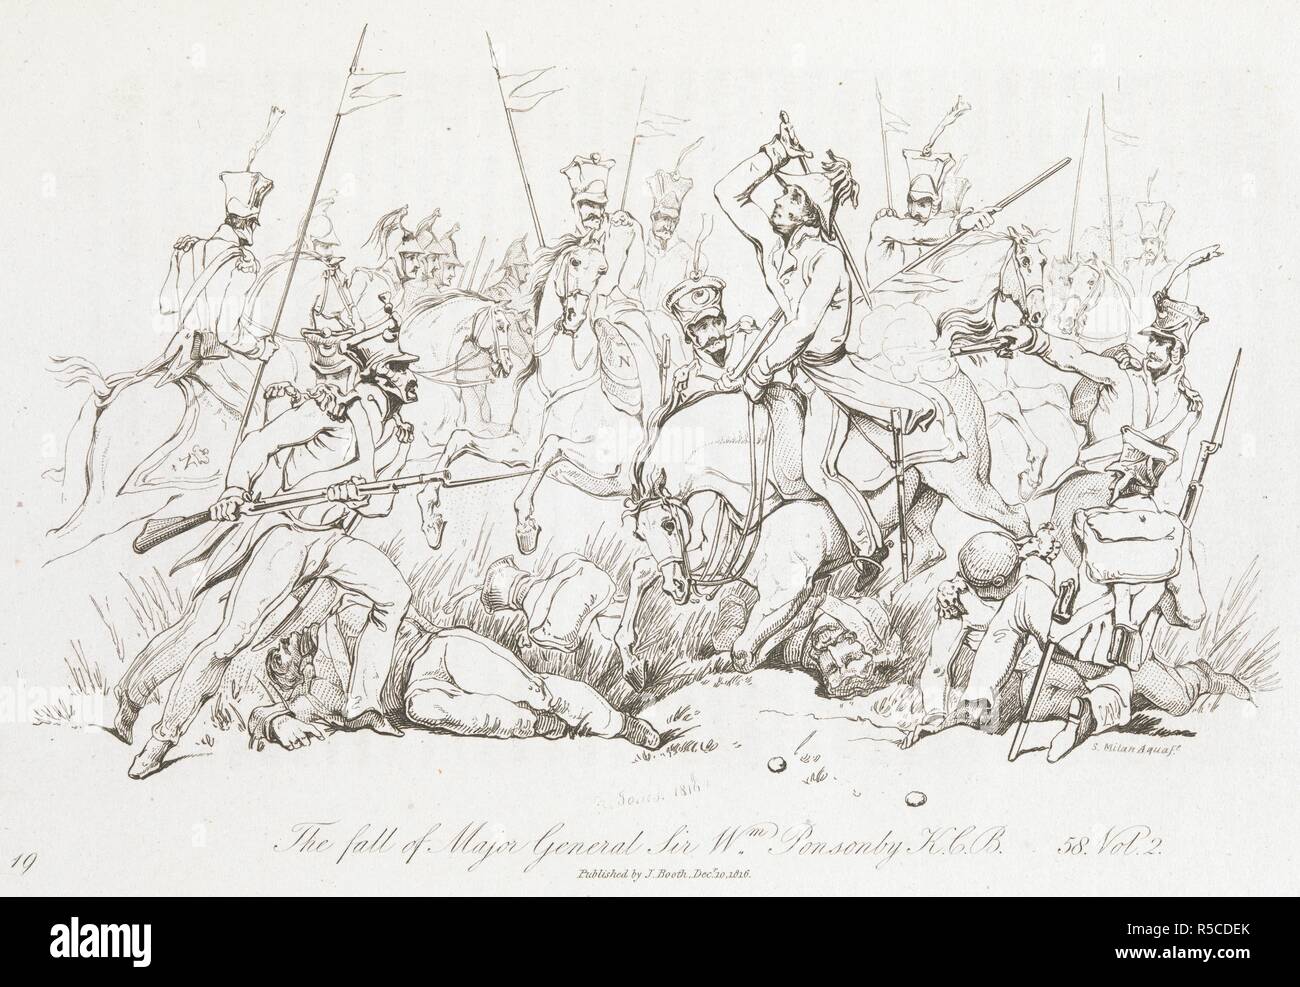 The fall of Maj.Gen. Sir. W.Ponsonby, K.C.B. The Battle of Waterloo, also of Ligny and Quatre-Bras described by ... a near observer ... [A narrative by C. A. Eaton, with a sketch by J. Waldie... from sketches by Captain G. Jones. 2 vol. John Booth; T. Egerton: London, 1817. Source: G.5651 par 2, plate 19, opposite page 58. Author: Eaton, Charlotte Anne. Jones, Captain George. Stock Photo